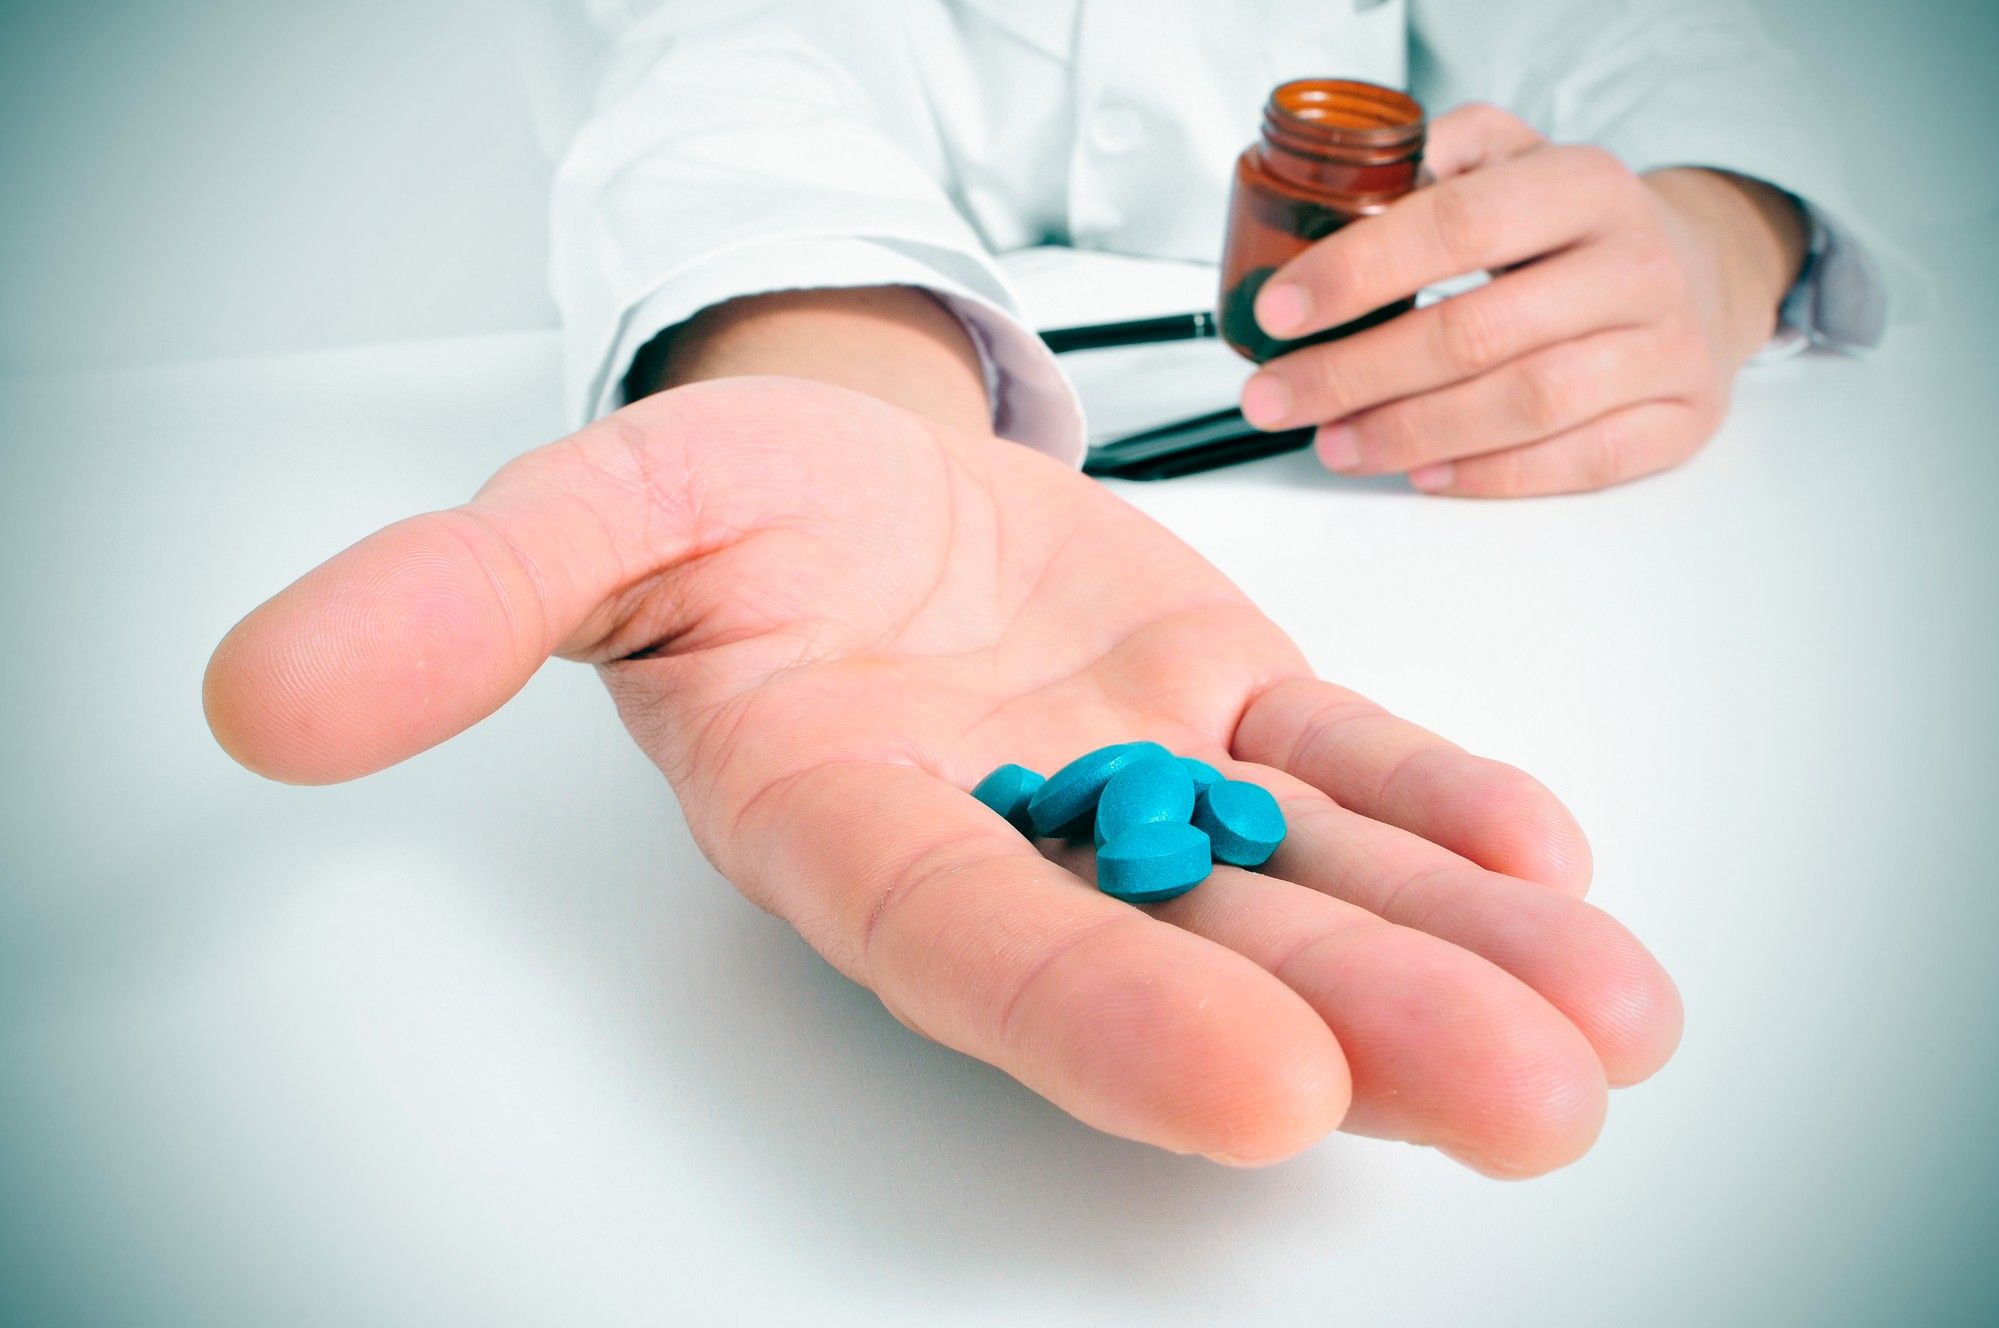 Viagra-Like Male Enhancement Supplement Contains Unapproved Drugs